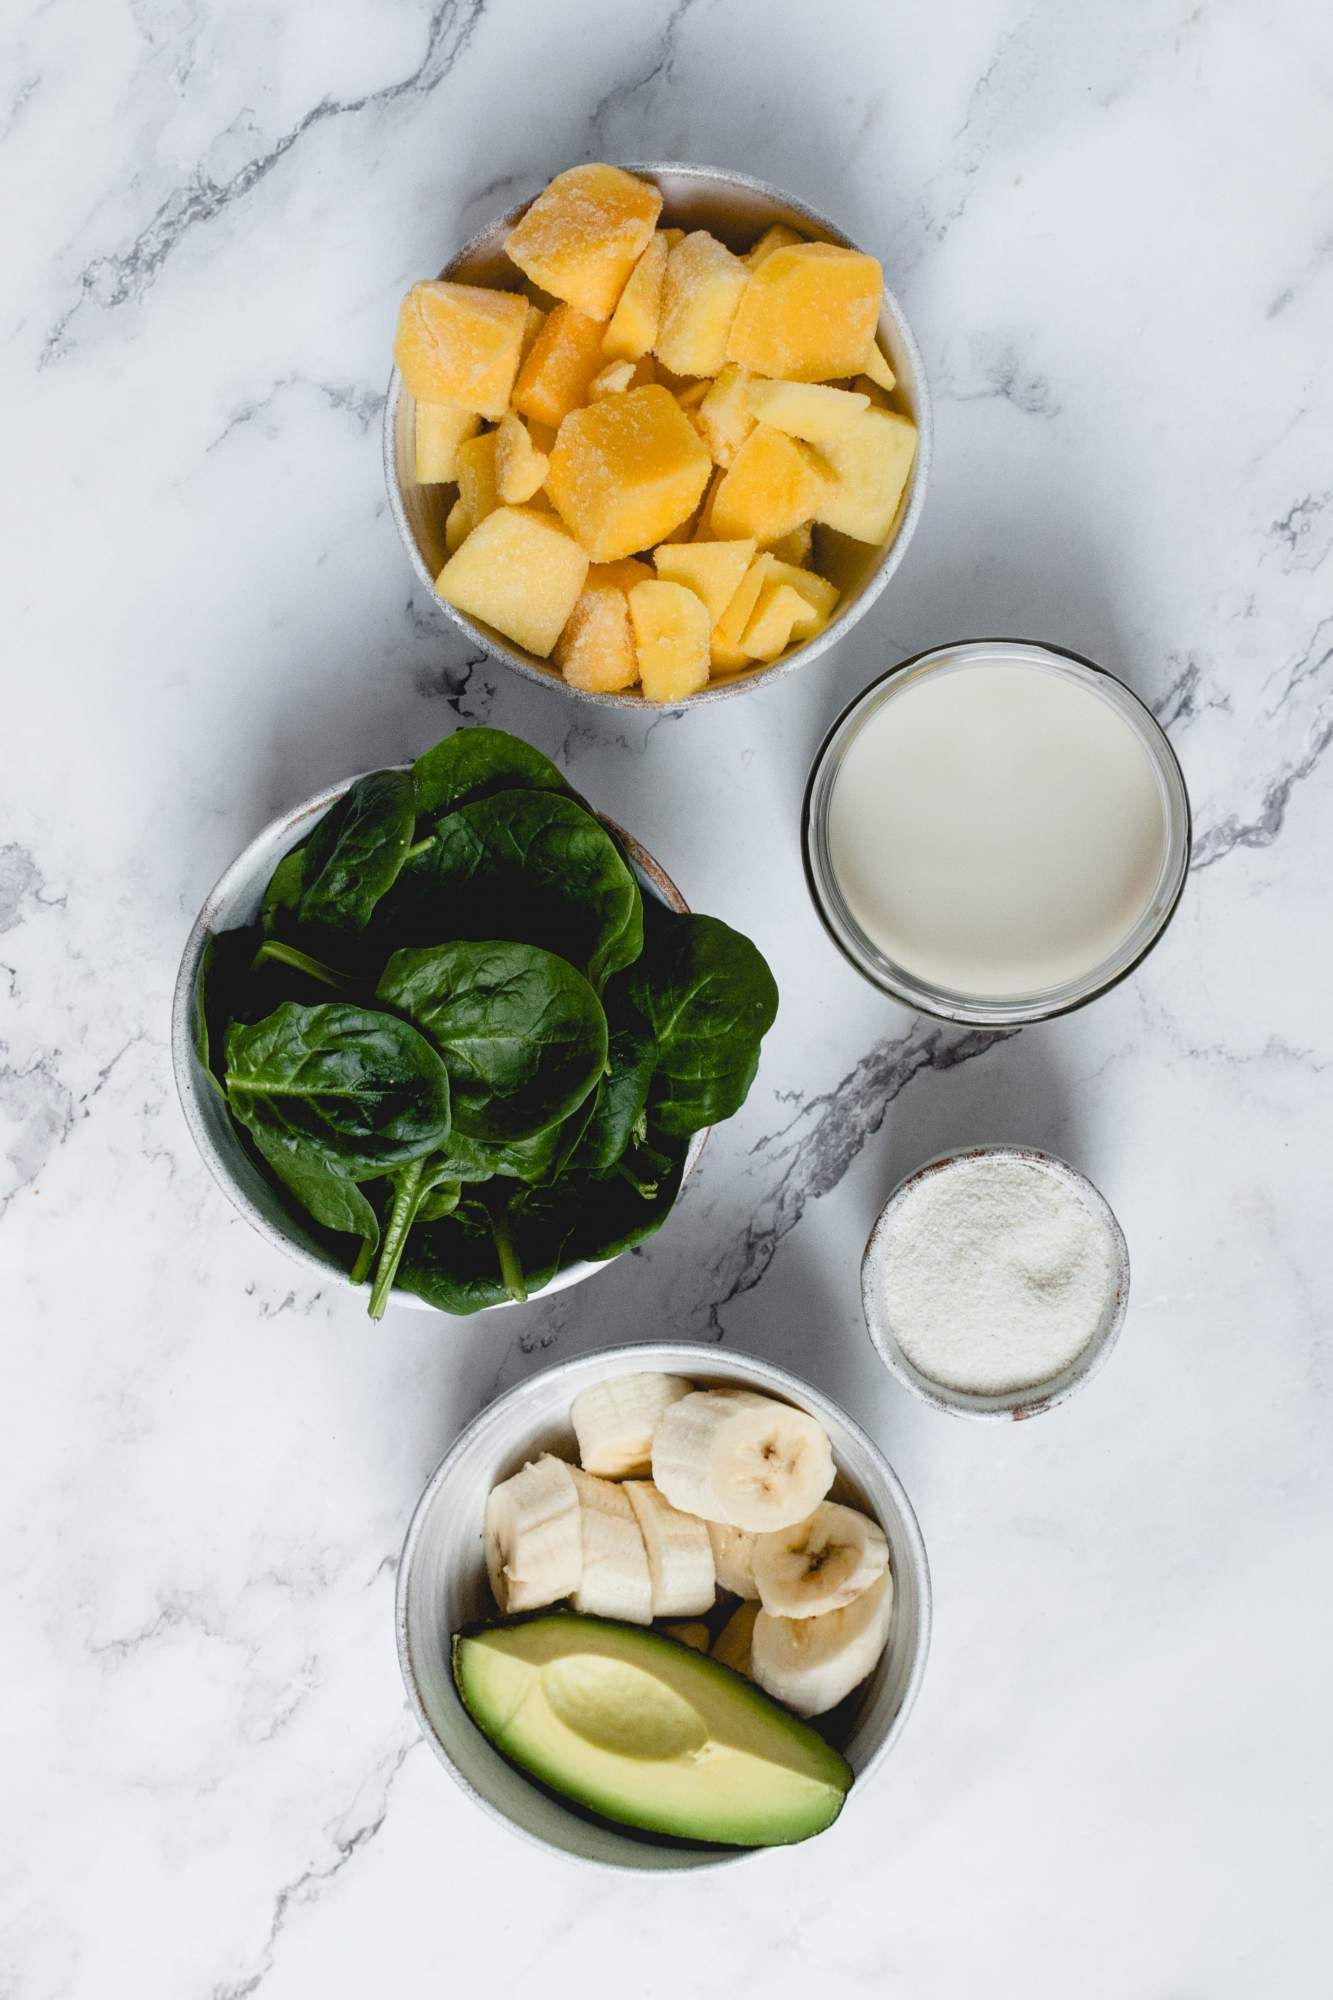 Ingredients for a mango and spinach smoothie including spinach leaves, avocado, banana, frozen mango, and protein powder.